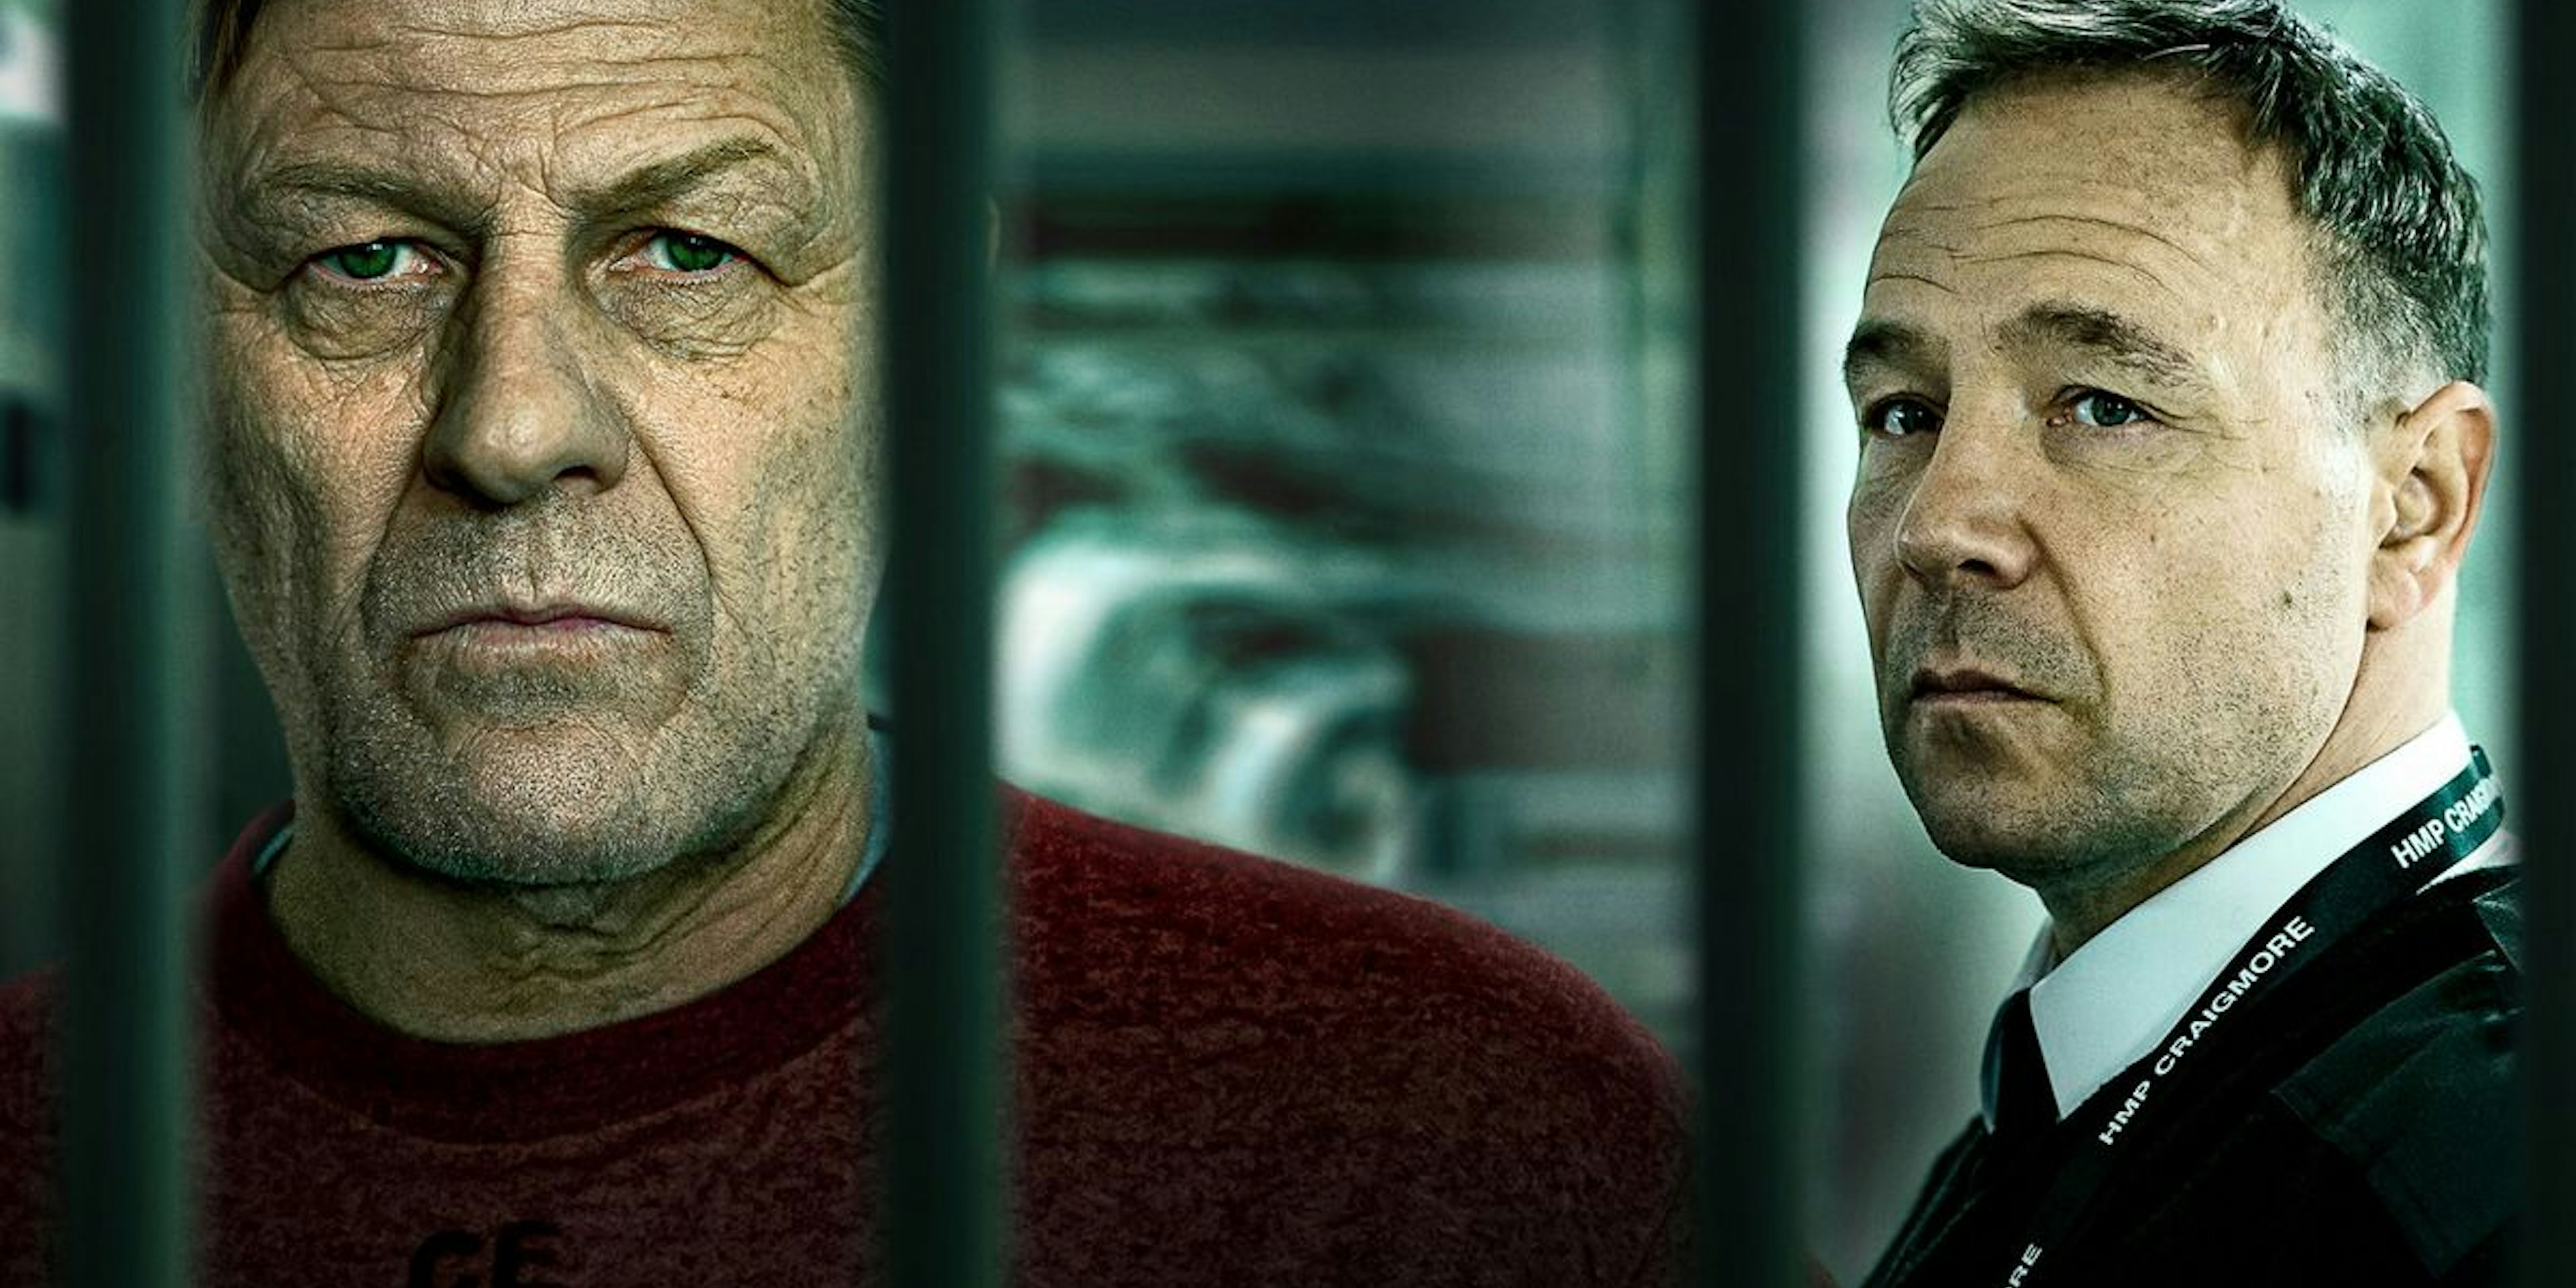 Certainly not a waste of your time: a review of new BBC drama Time starring Stephen Graham and Sean Bean